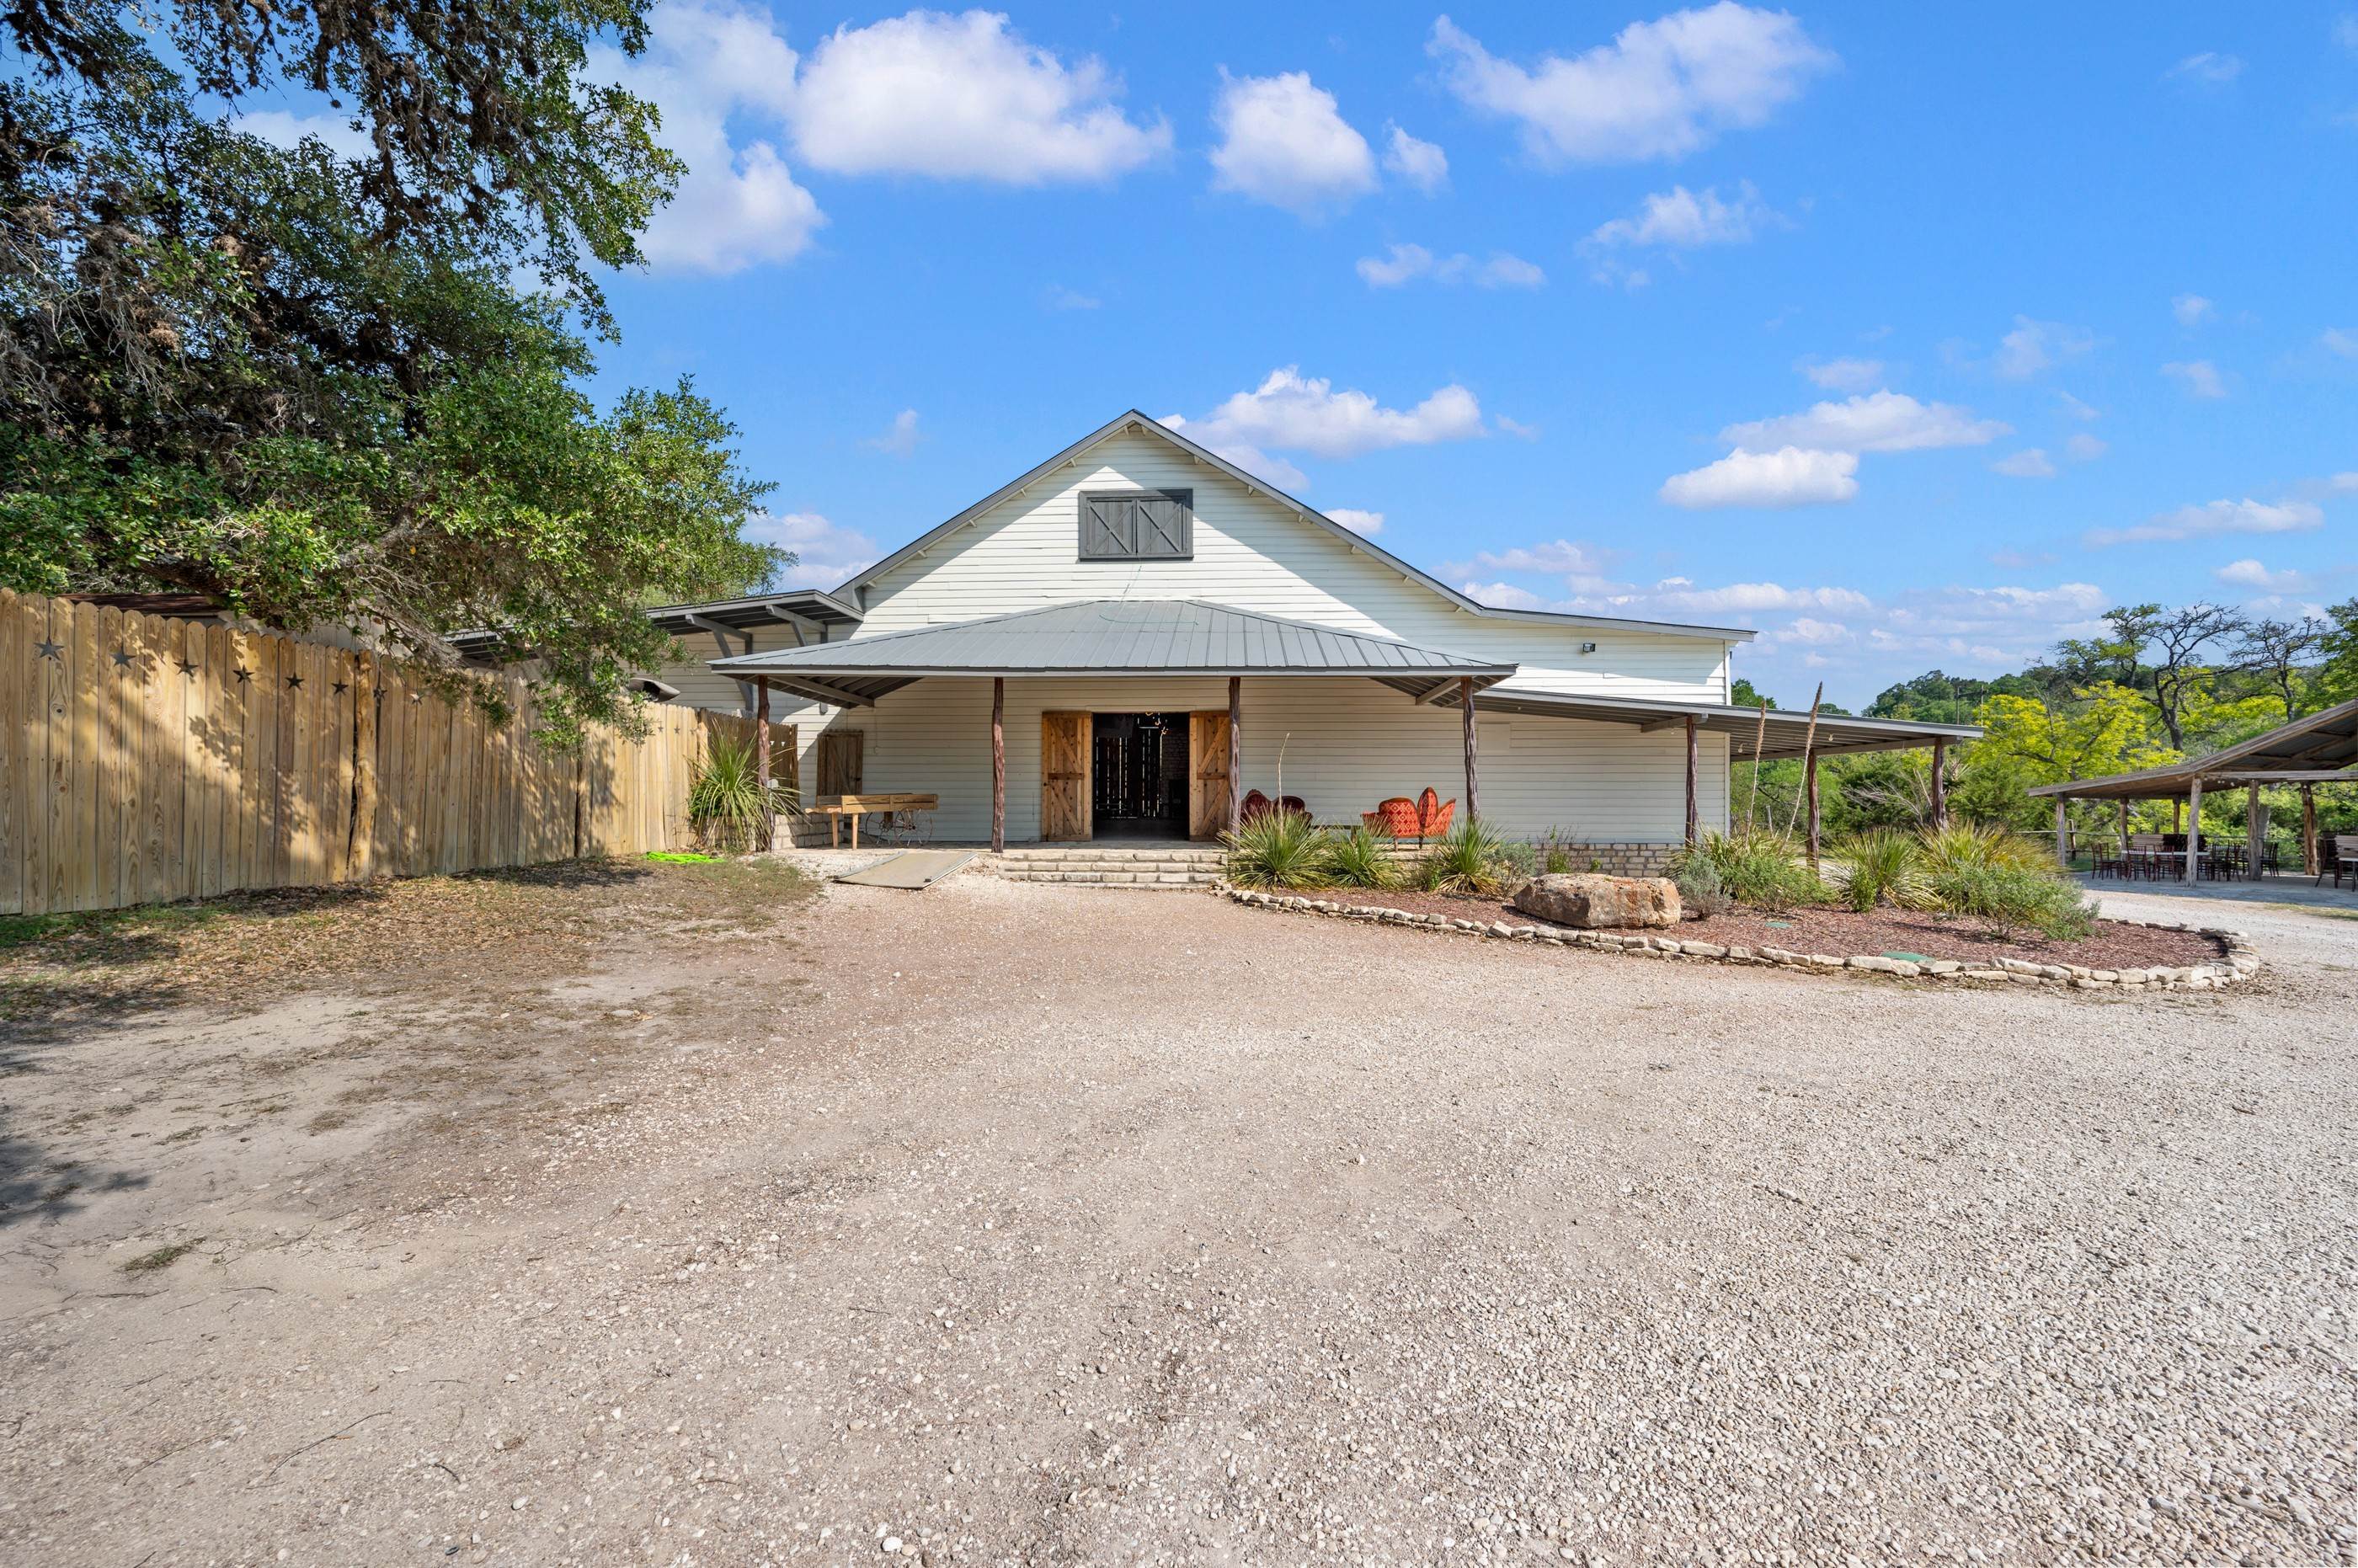 37. Farm and Ranch Properties for Sale at Don Strange Ranch 103 Waring Welfare Road Boerne, Kendall County, Texas 78006 United States